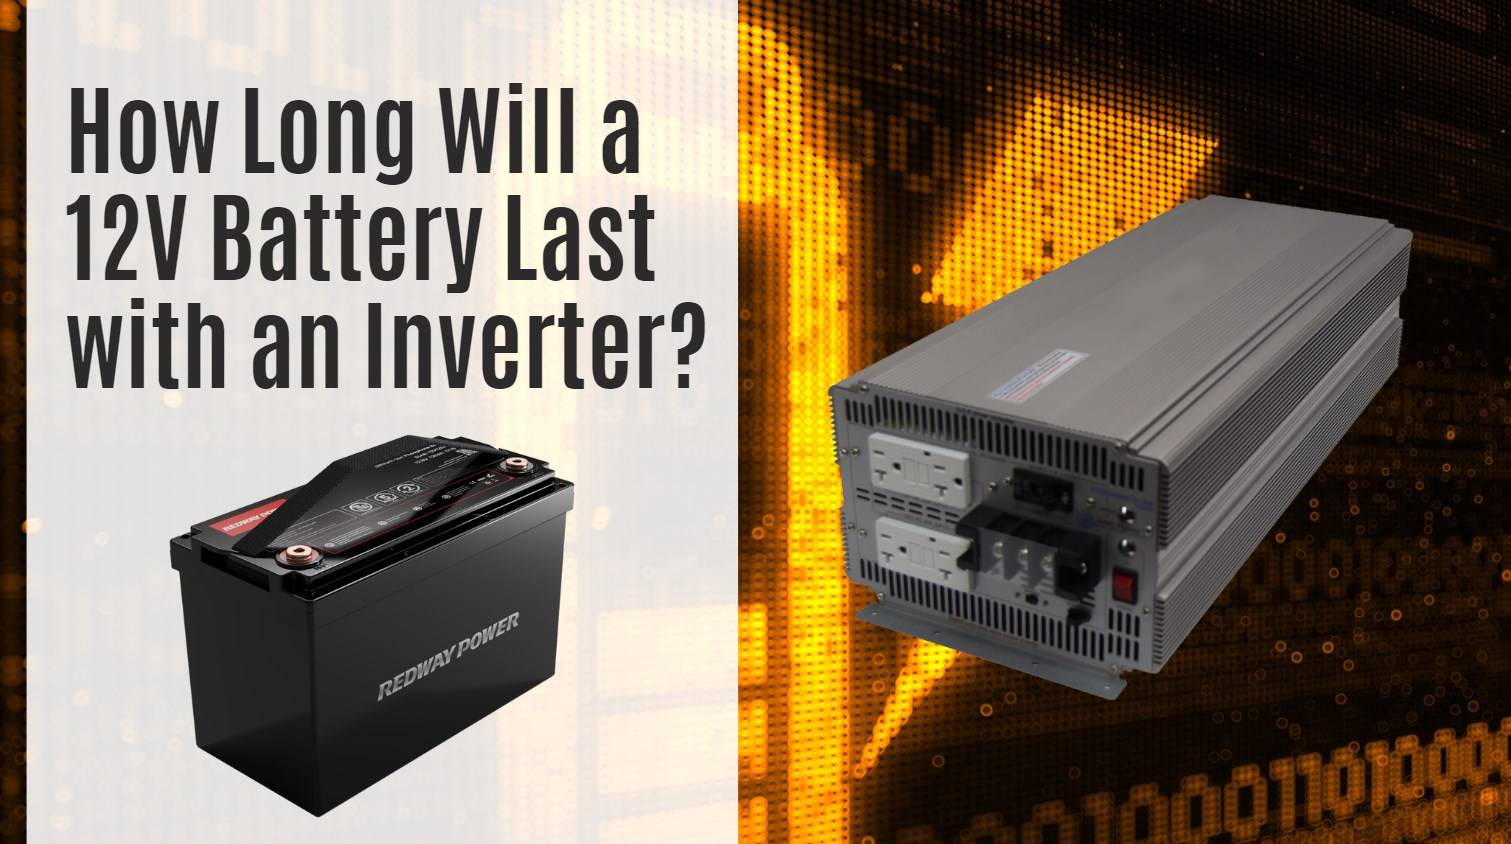 How Long Will a 12V Battery Last with an Inverter? 12v inverter with 12v 100ah lfp battery